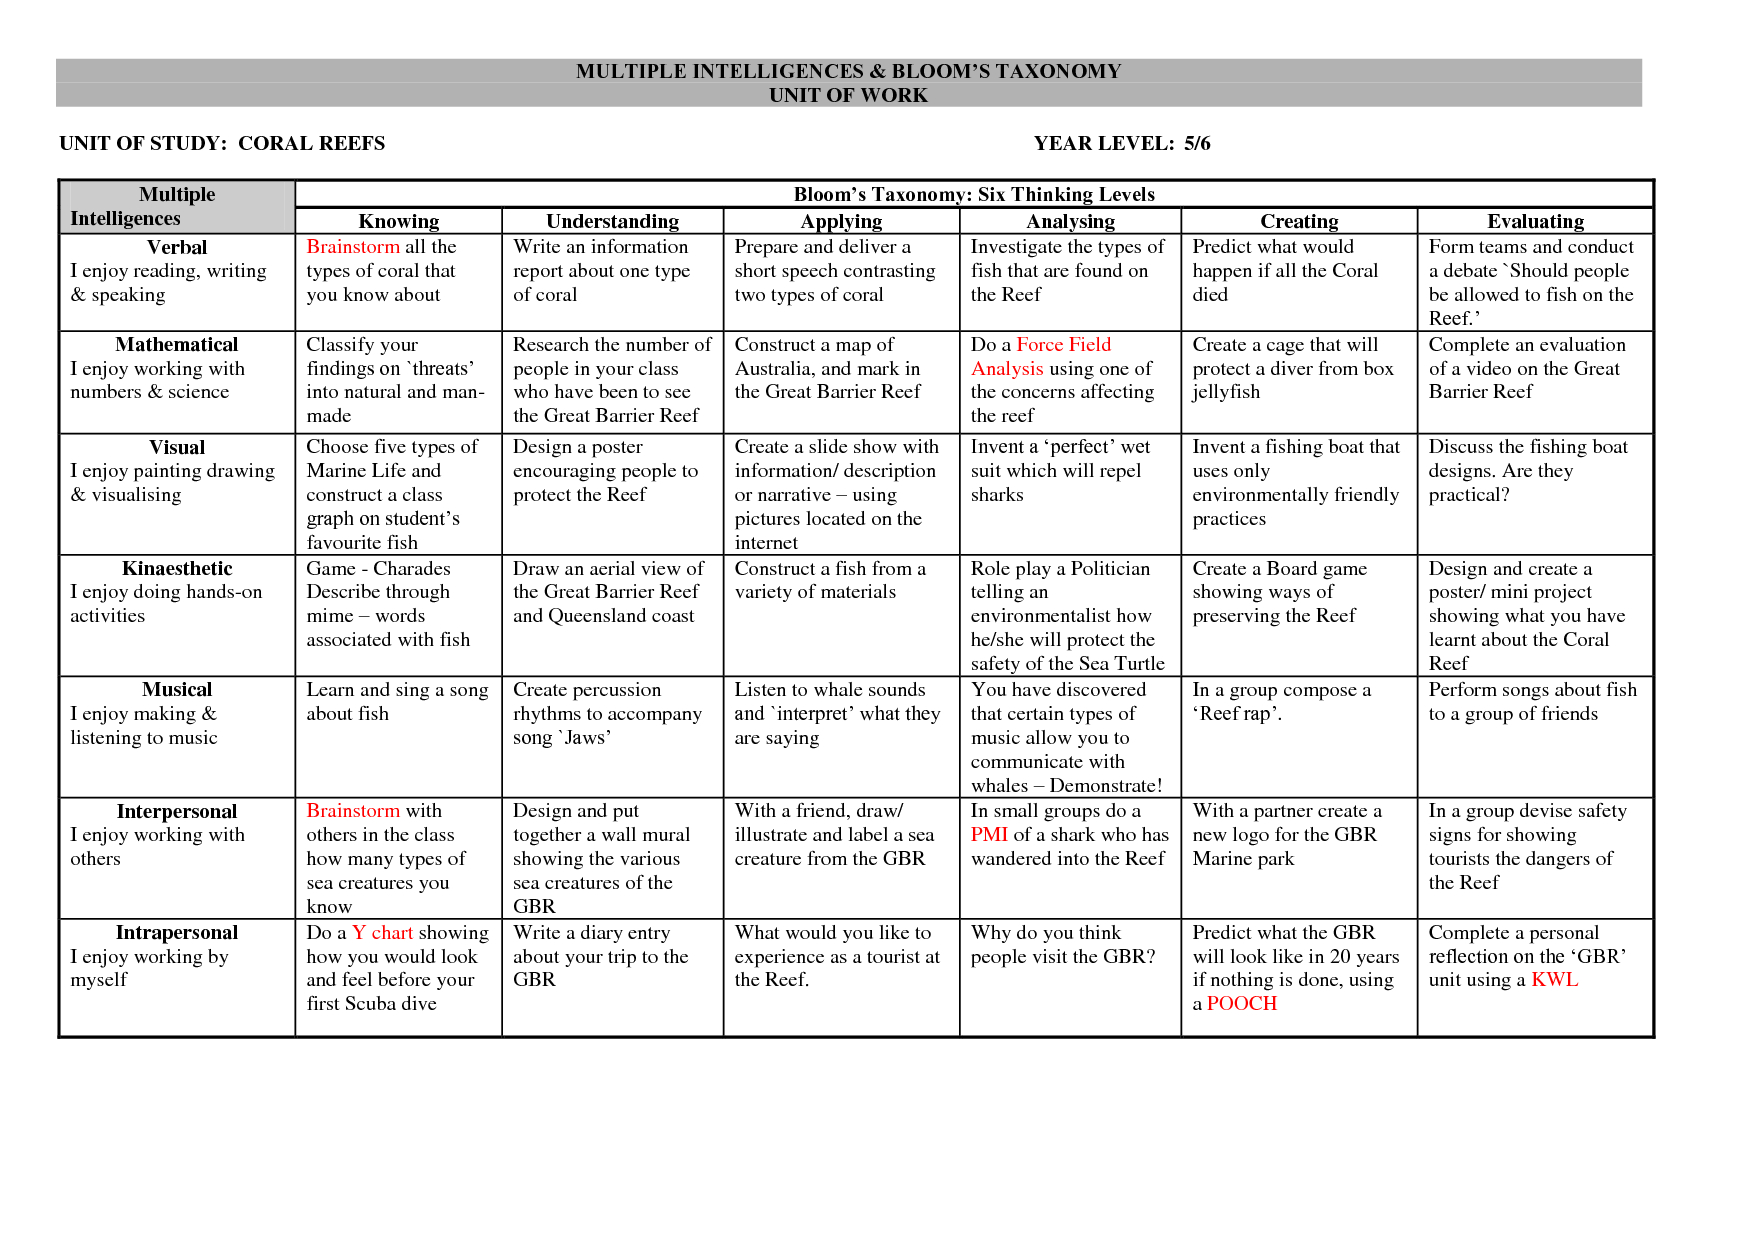 Assignment Grid For A Coral Reef Unit, Grades 5 &amp;amp; 6